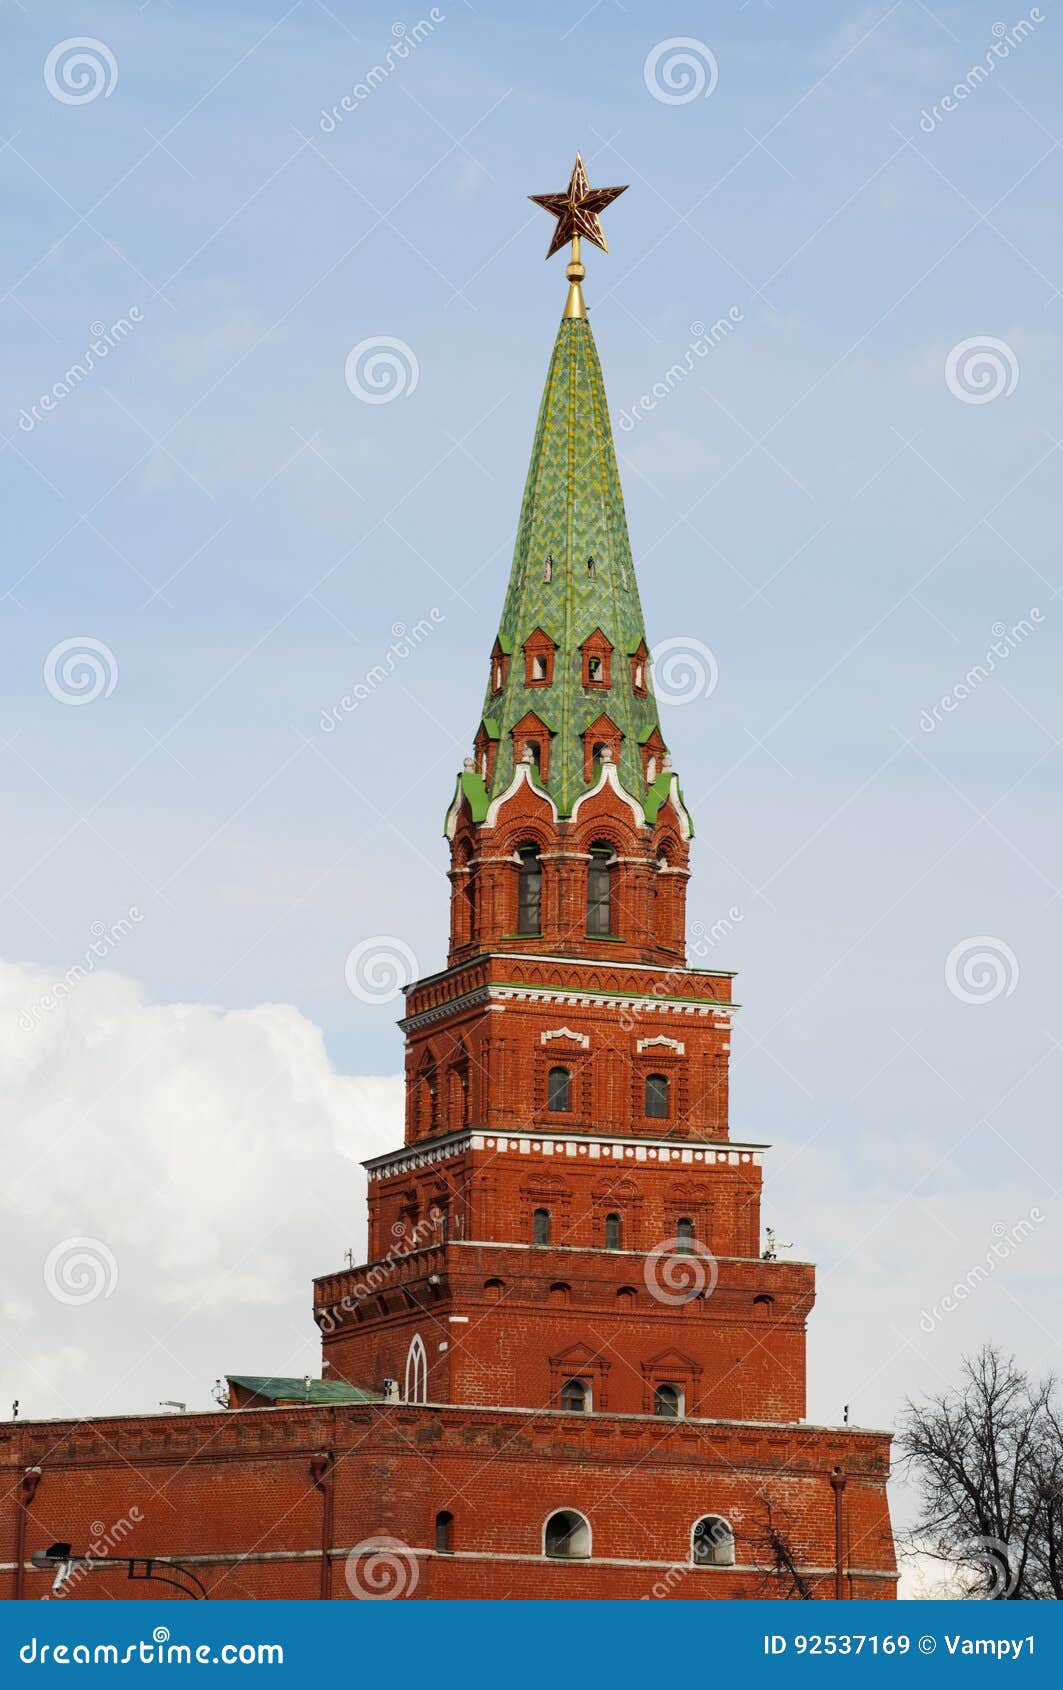 the kremlin, star, moscow, russian federal city, russian federation, russia